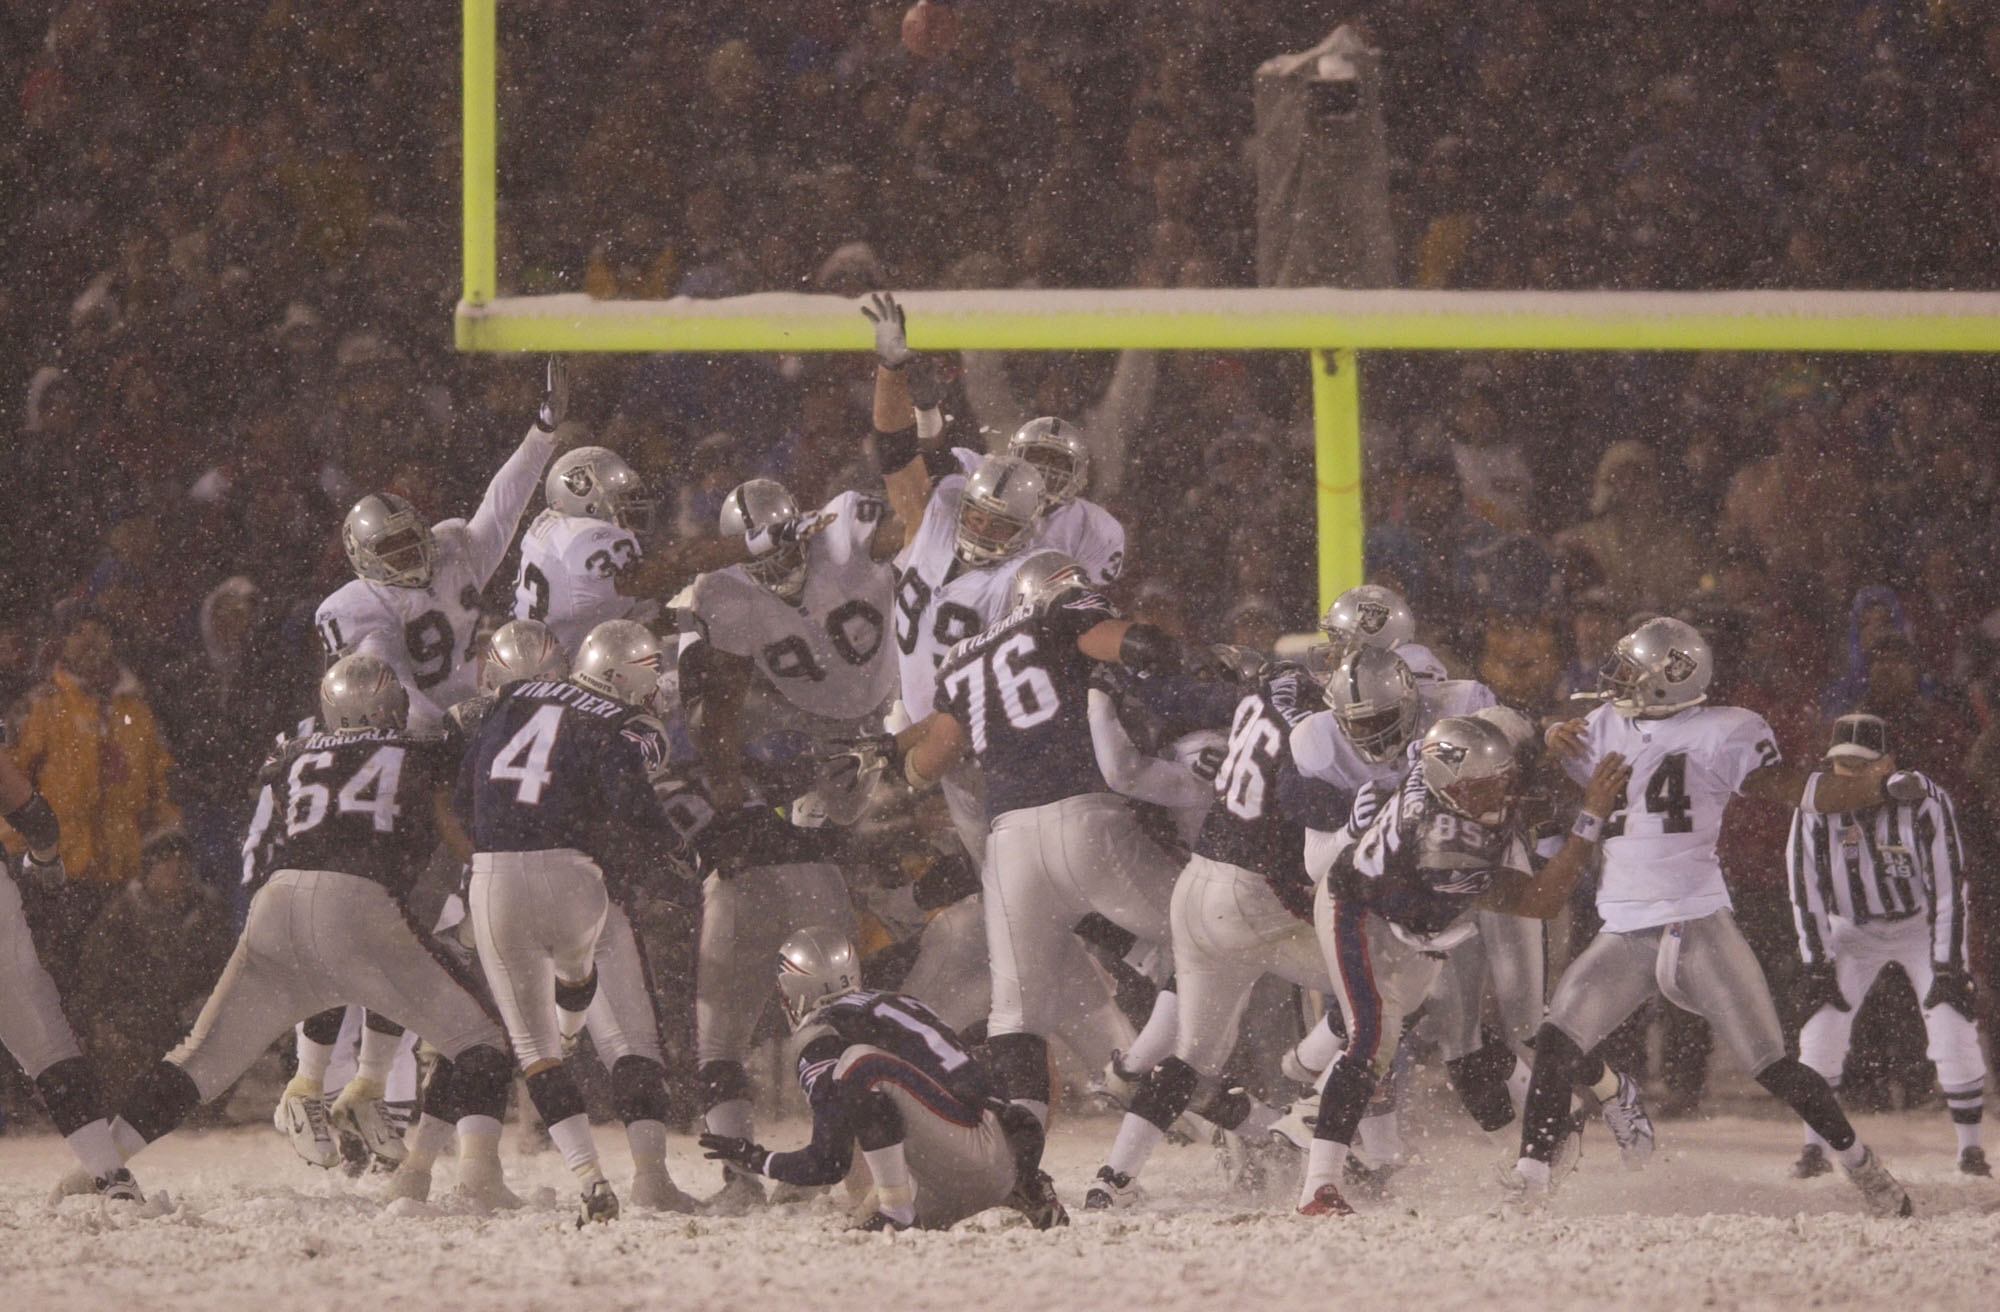 Adam Vinatieri of the New England Patriots kicks the game-winning field goal against the Oakland Raiders during the AFC playoff game at Foxboro Stadium in Foxboro, Massachusetts. (Photo by Ezra Shaw/Getty Images)